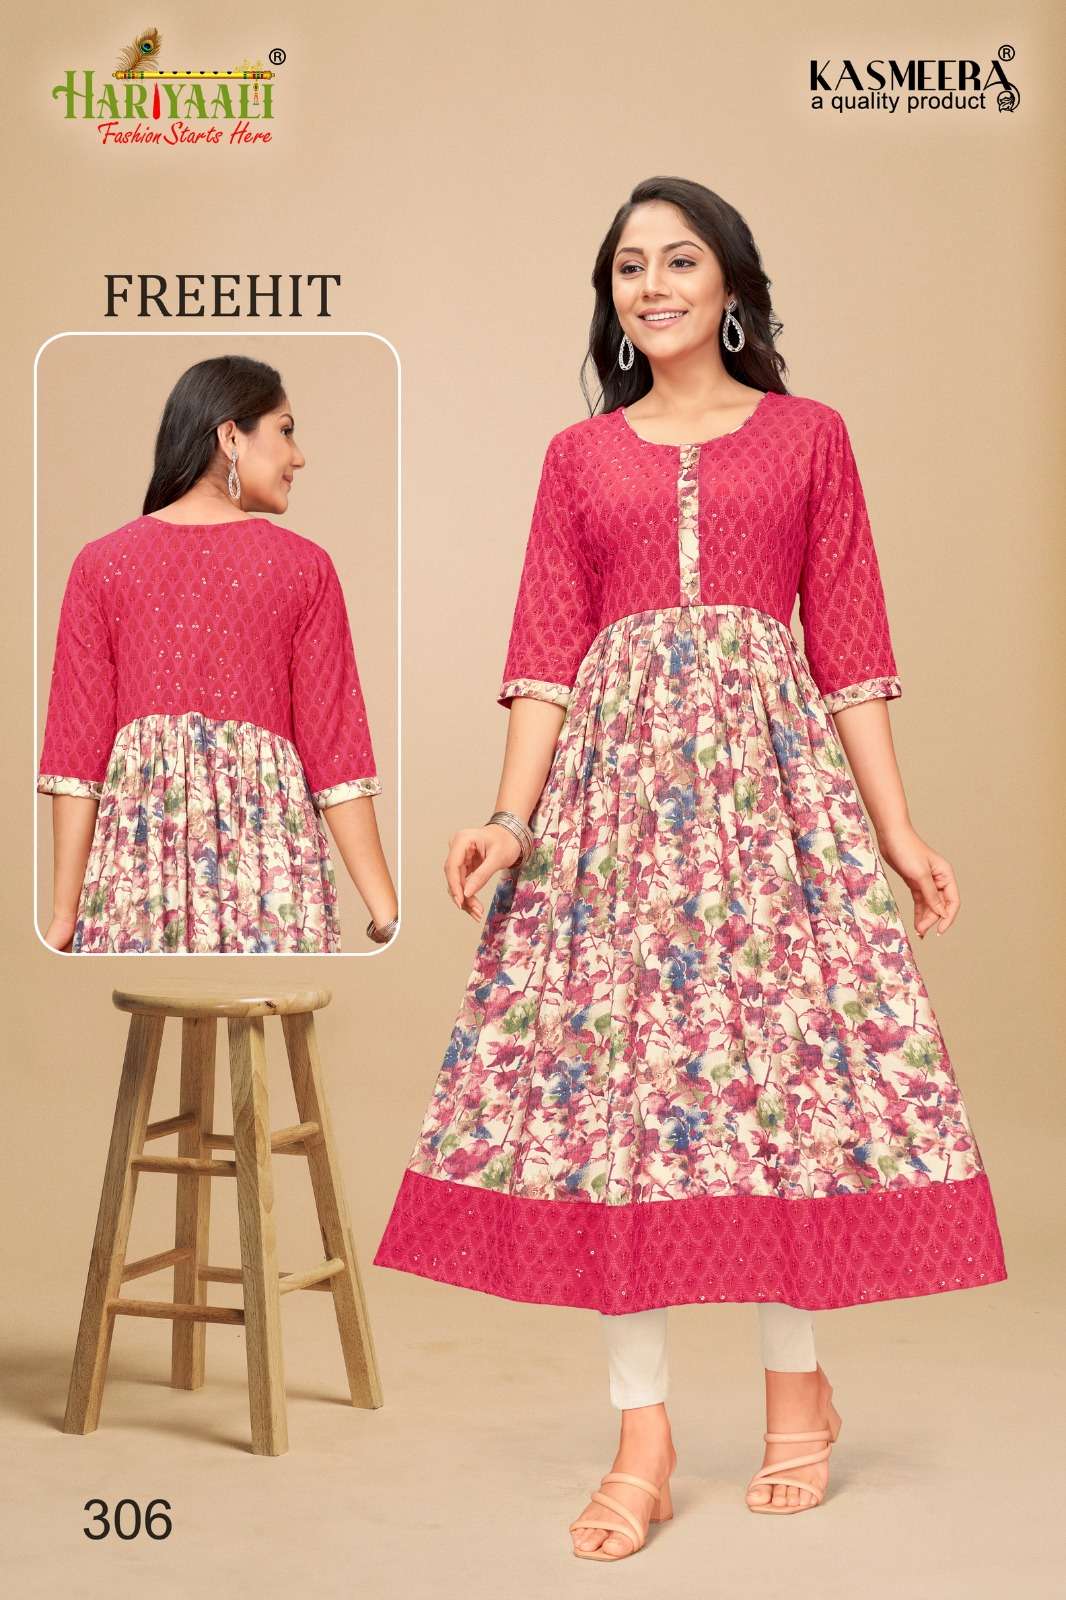 freehit vol 3 by hariyaali fancy amazing collection of flair kurtis combo set